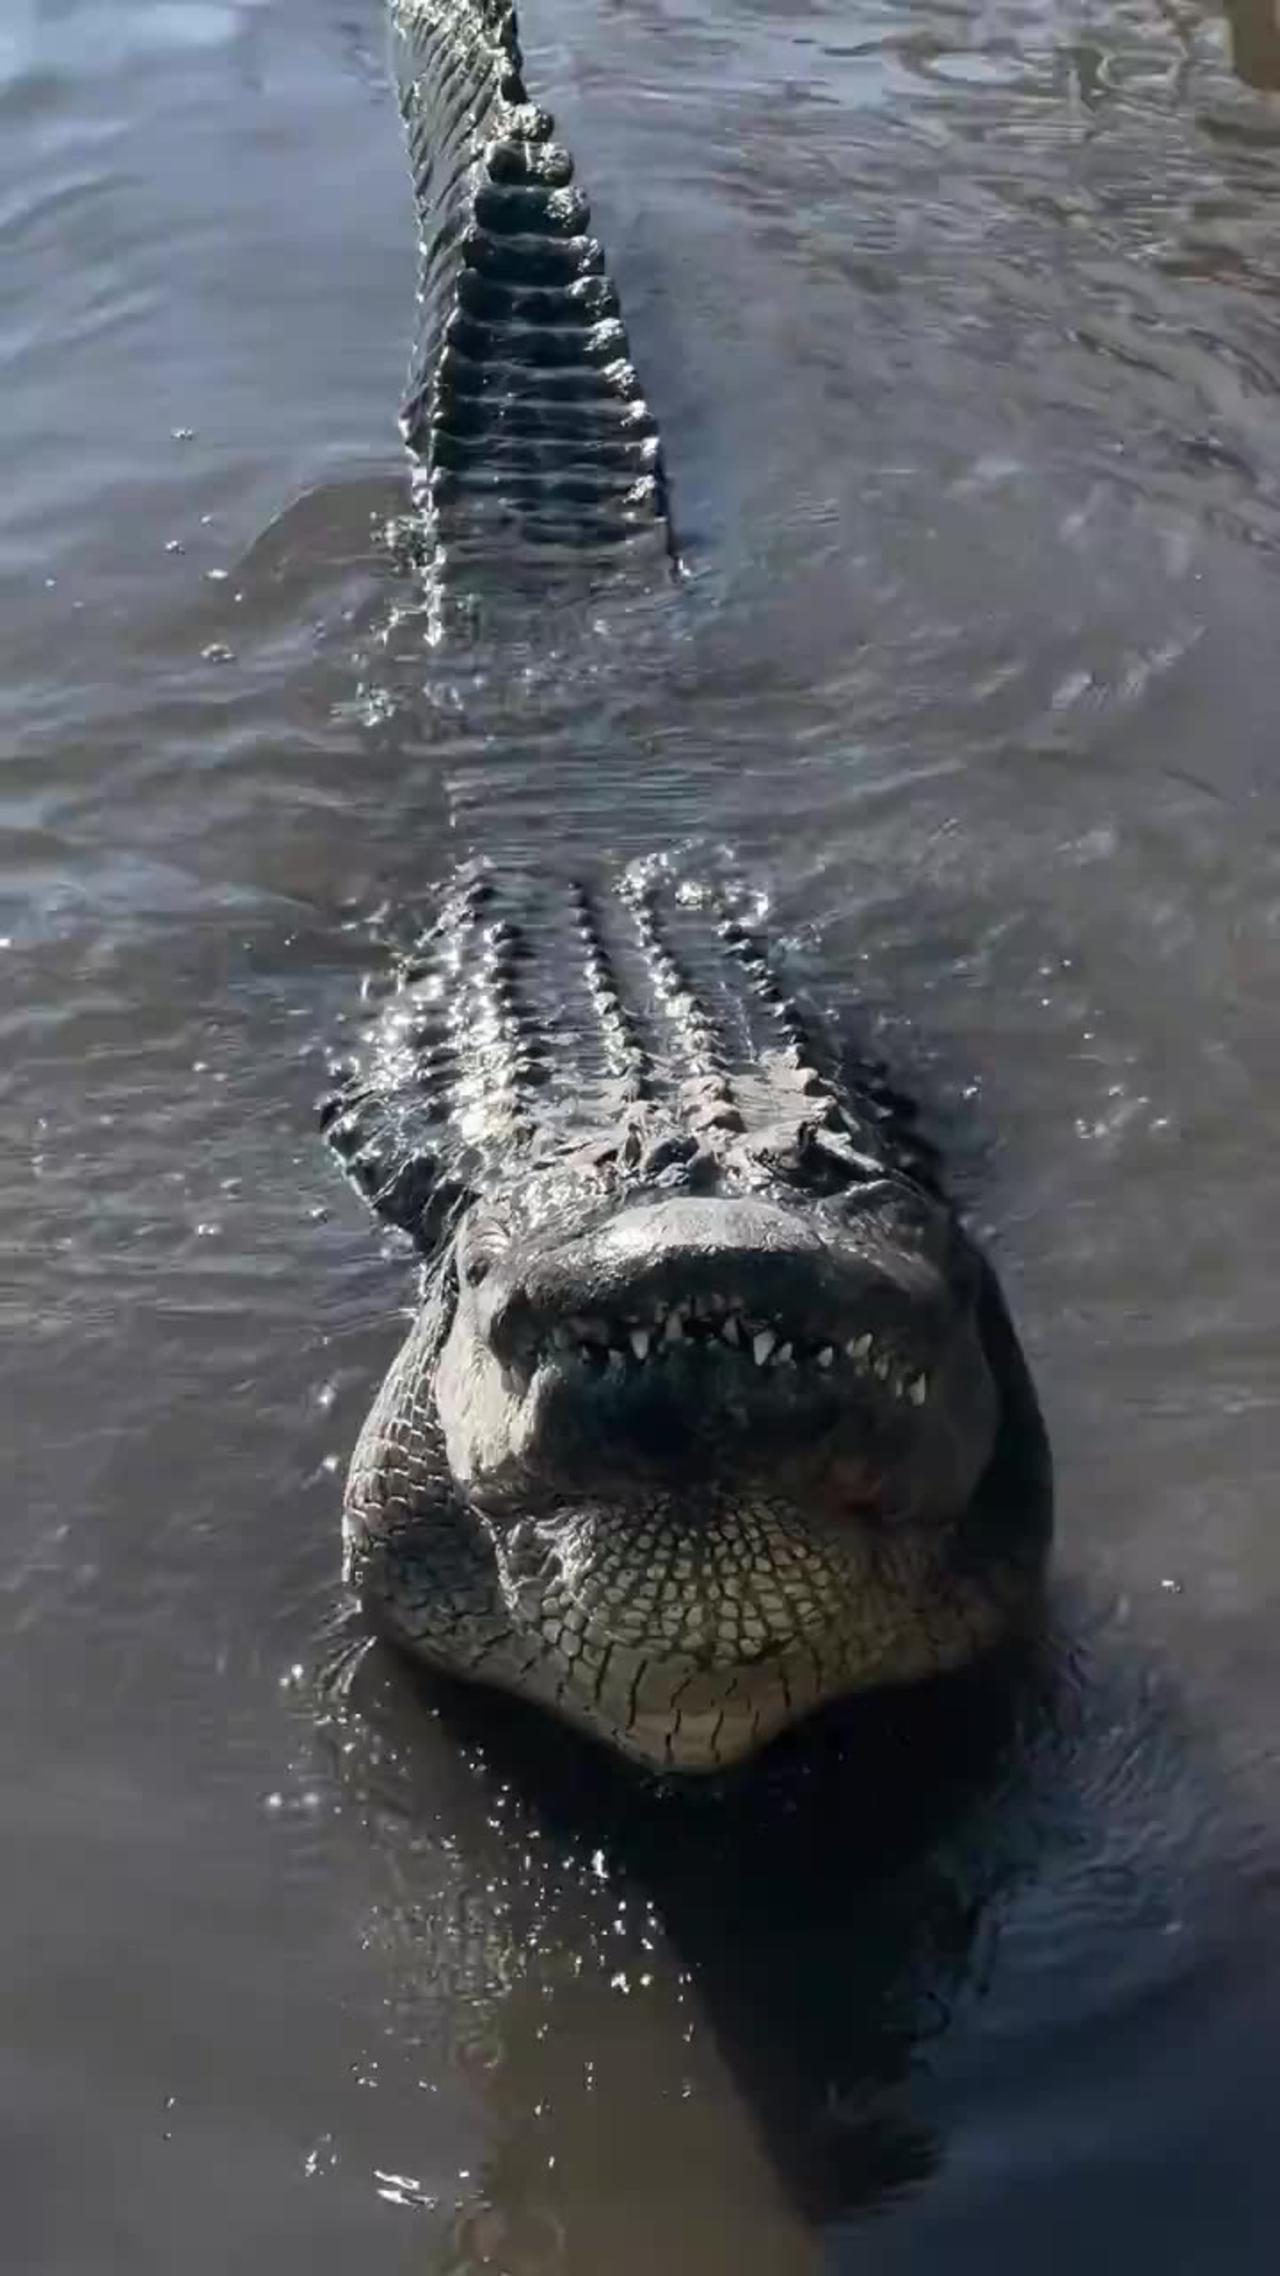 Alligators creating faraday waves that travel through the water to communicate courtship calls